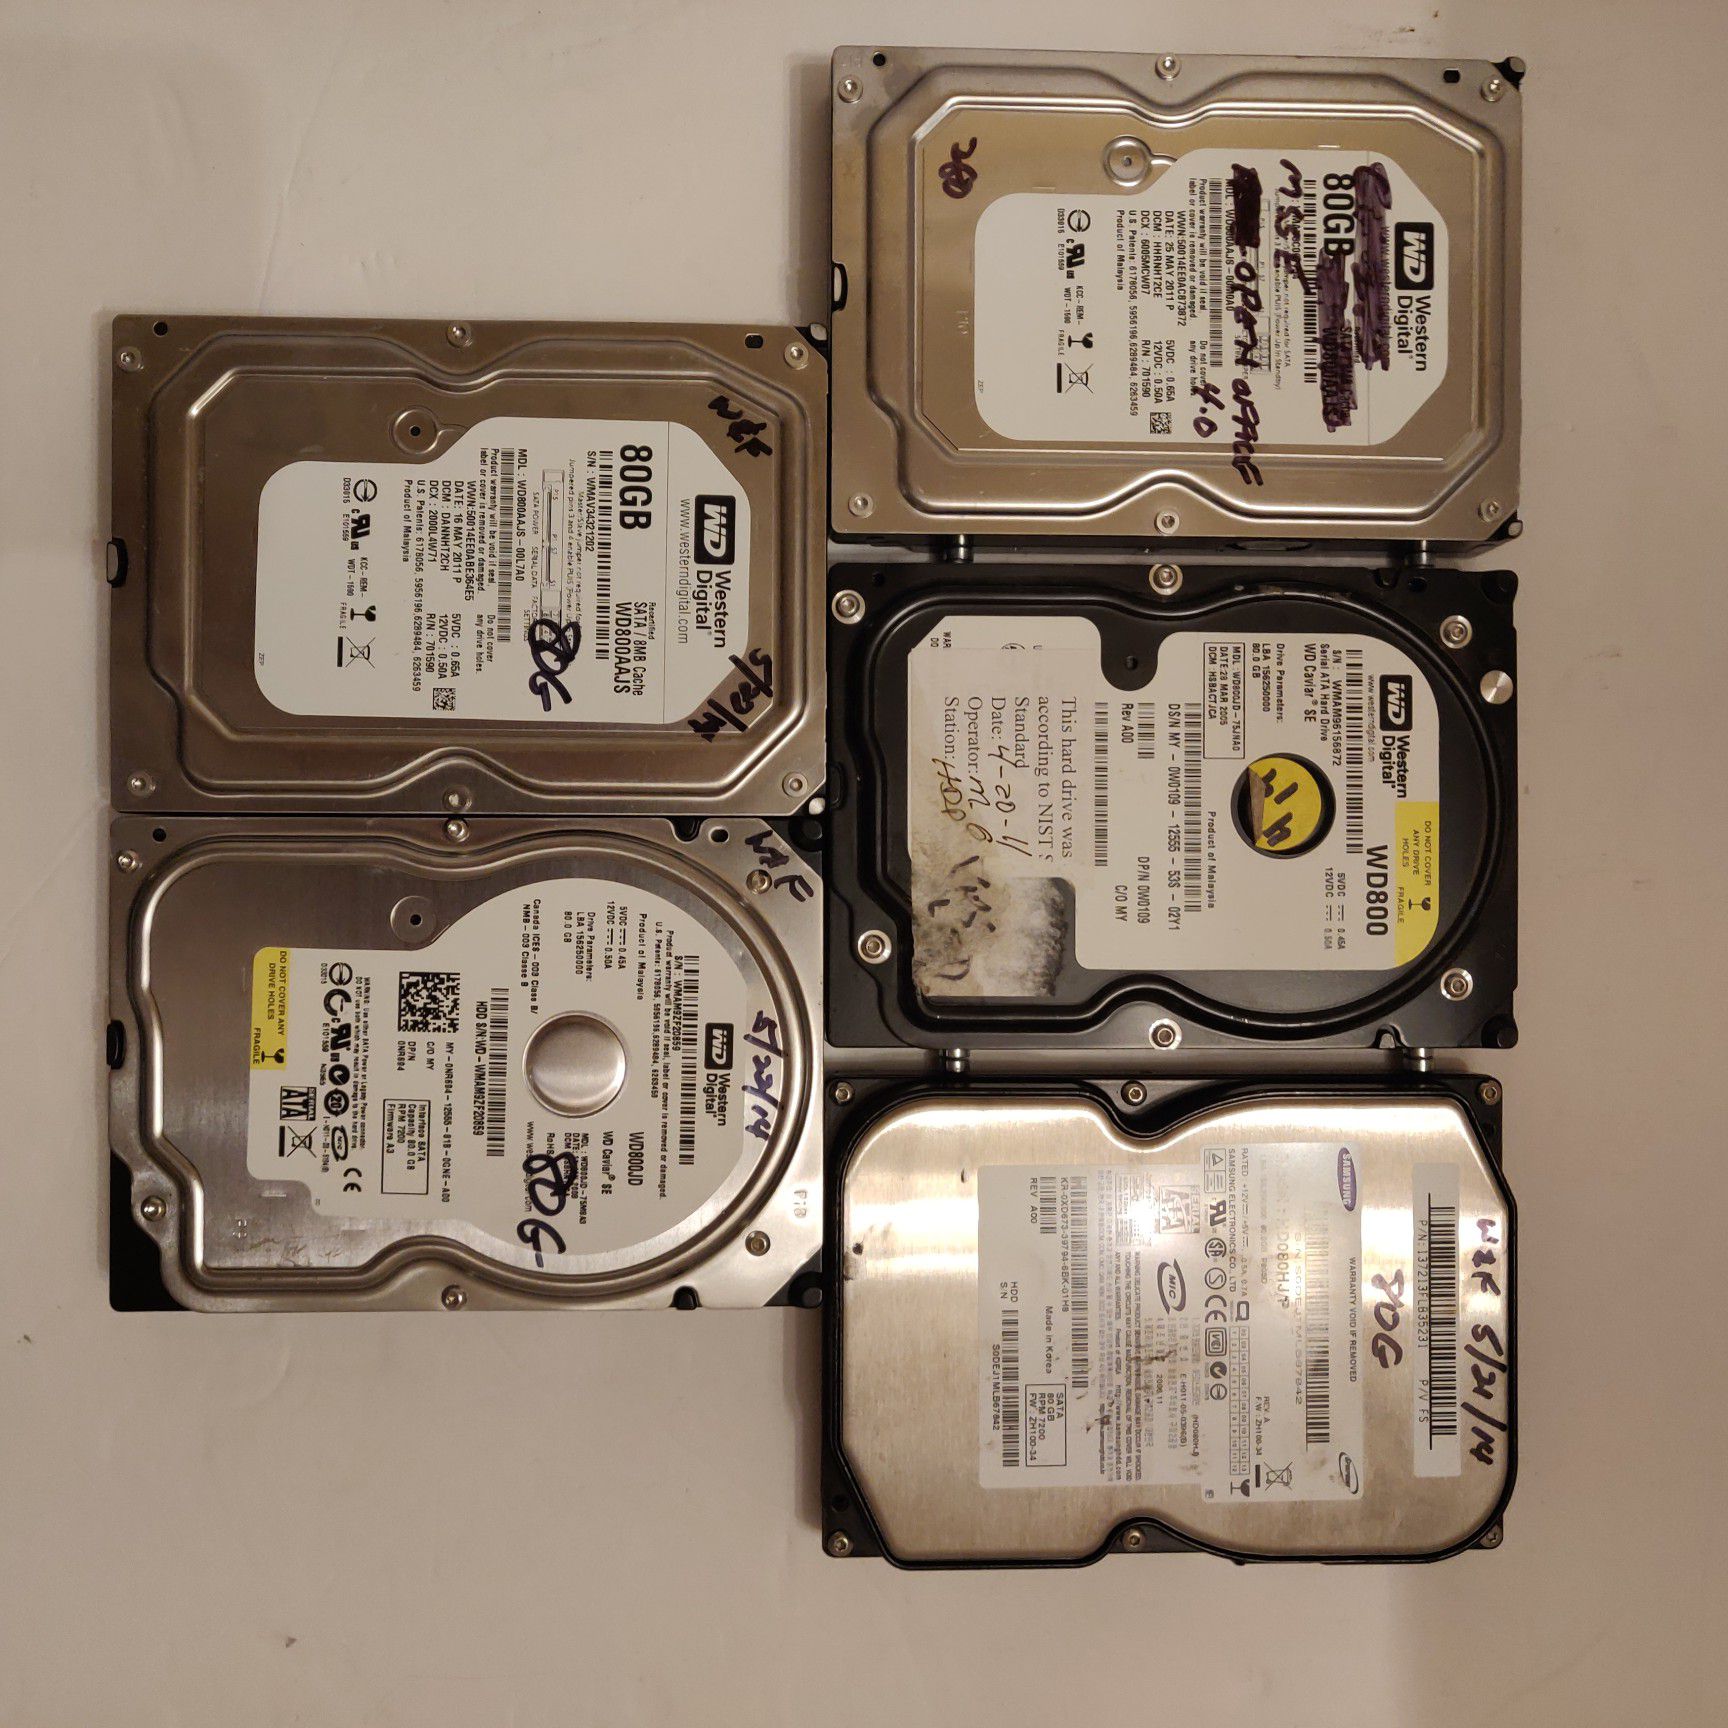 Various computer parts HDDS, Ram, DVD burners, and a cpu